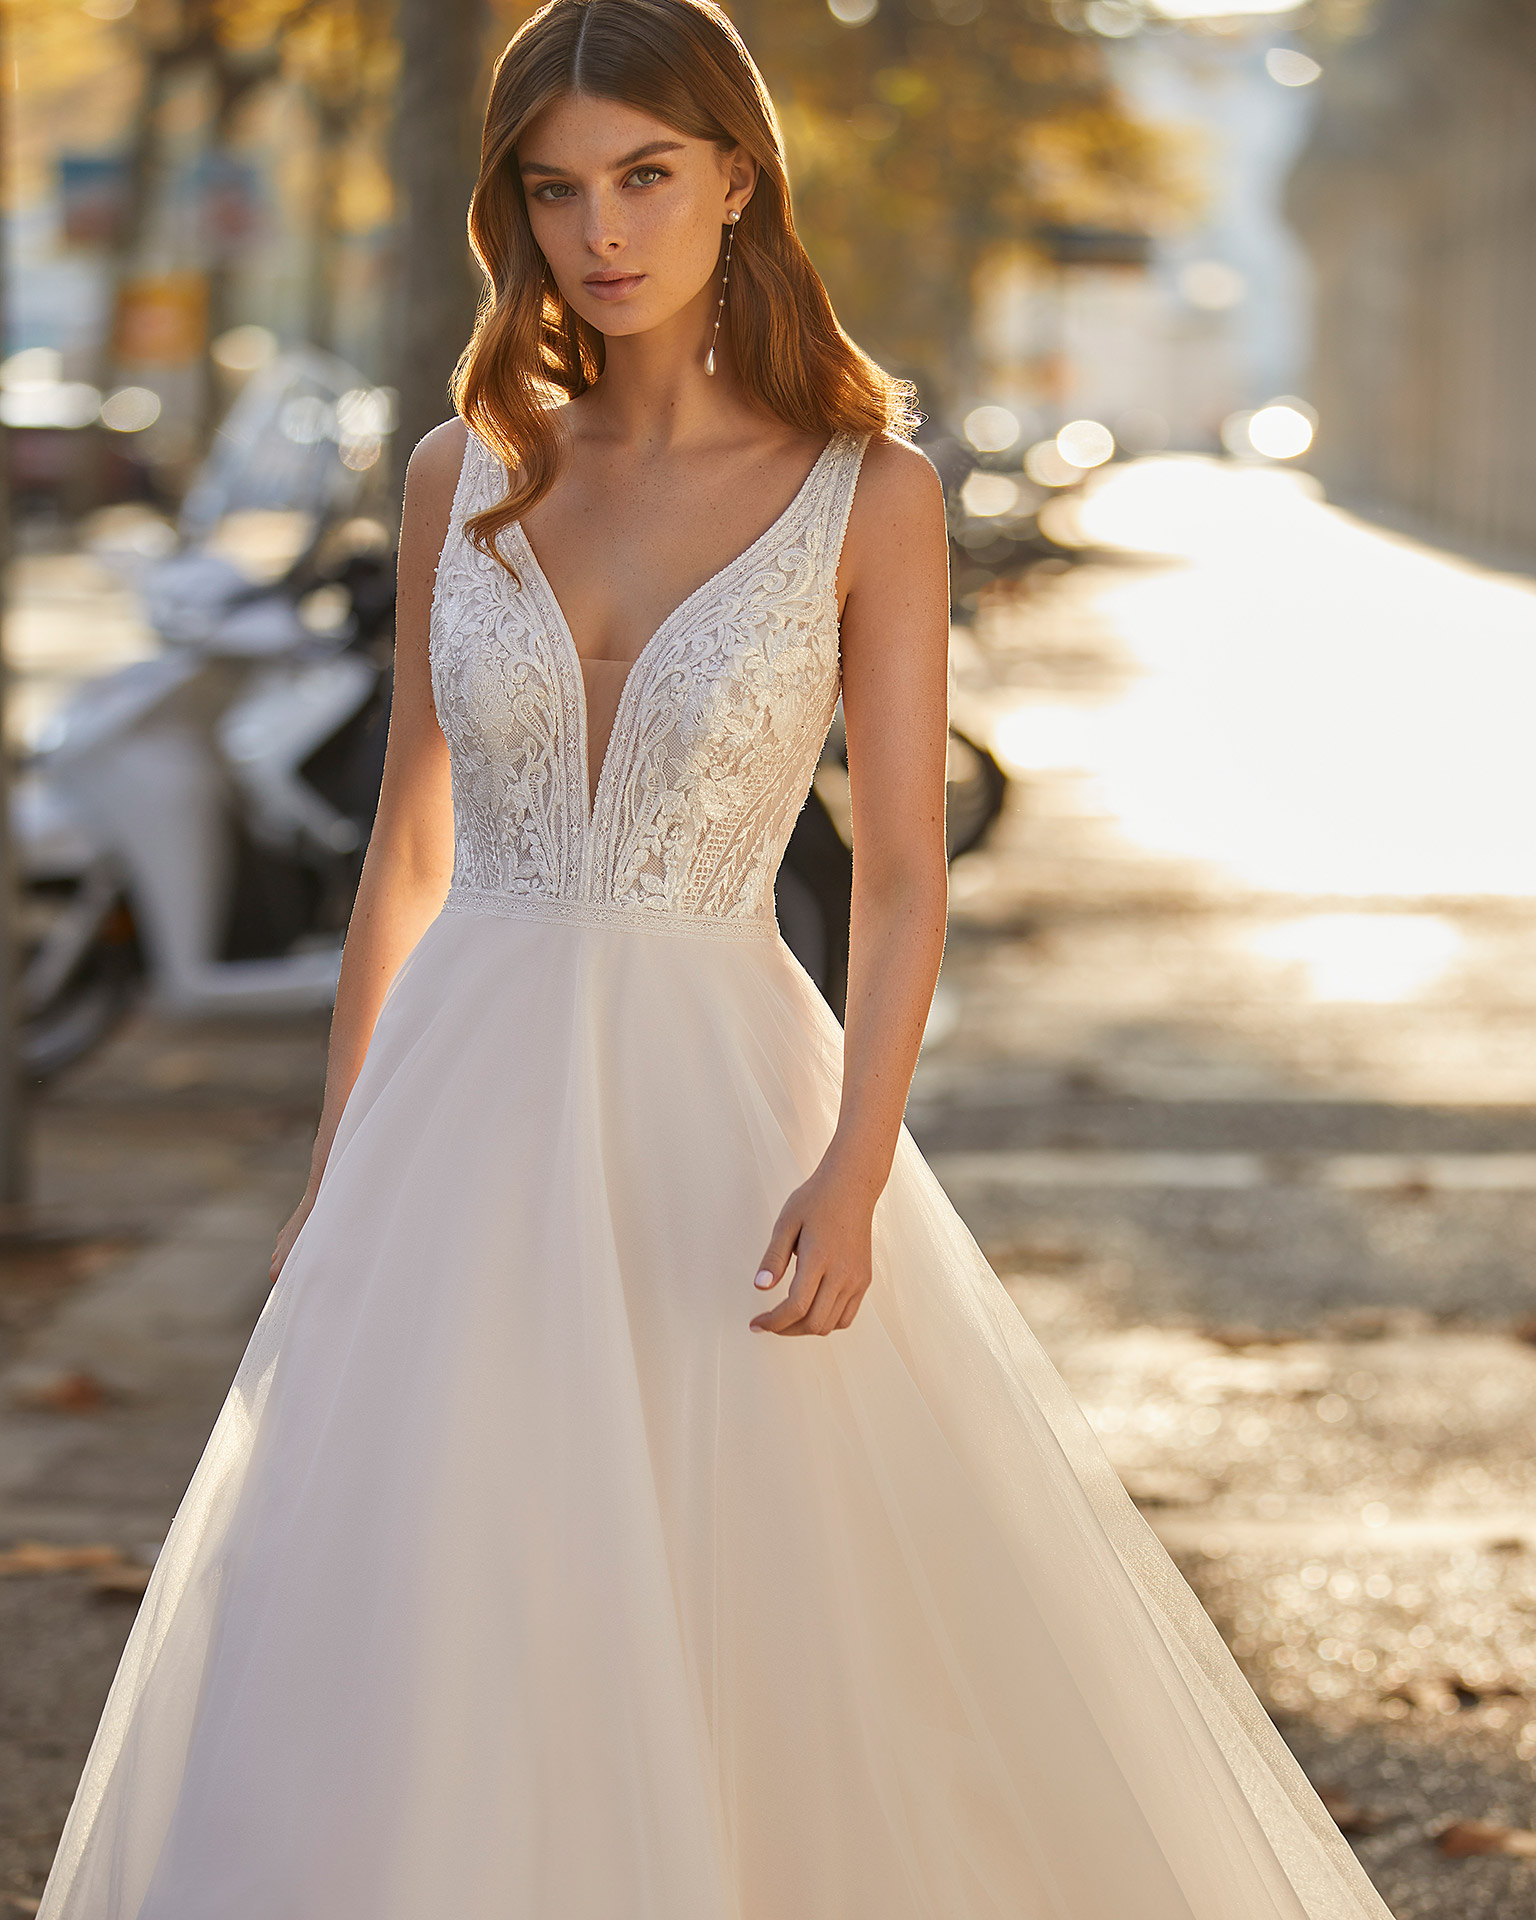 Romantic princess-style wedding dress, made of tulle and beadwork lace appliqués; with a deep-plunge neckline and low back. Unique Luna Novias dress made of tulle and lace with beadwork. LUNA_NOVIAS.